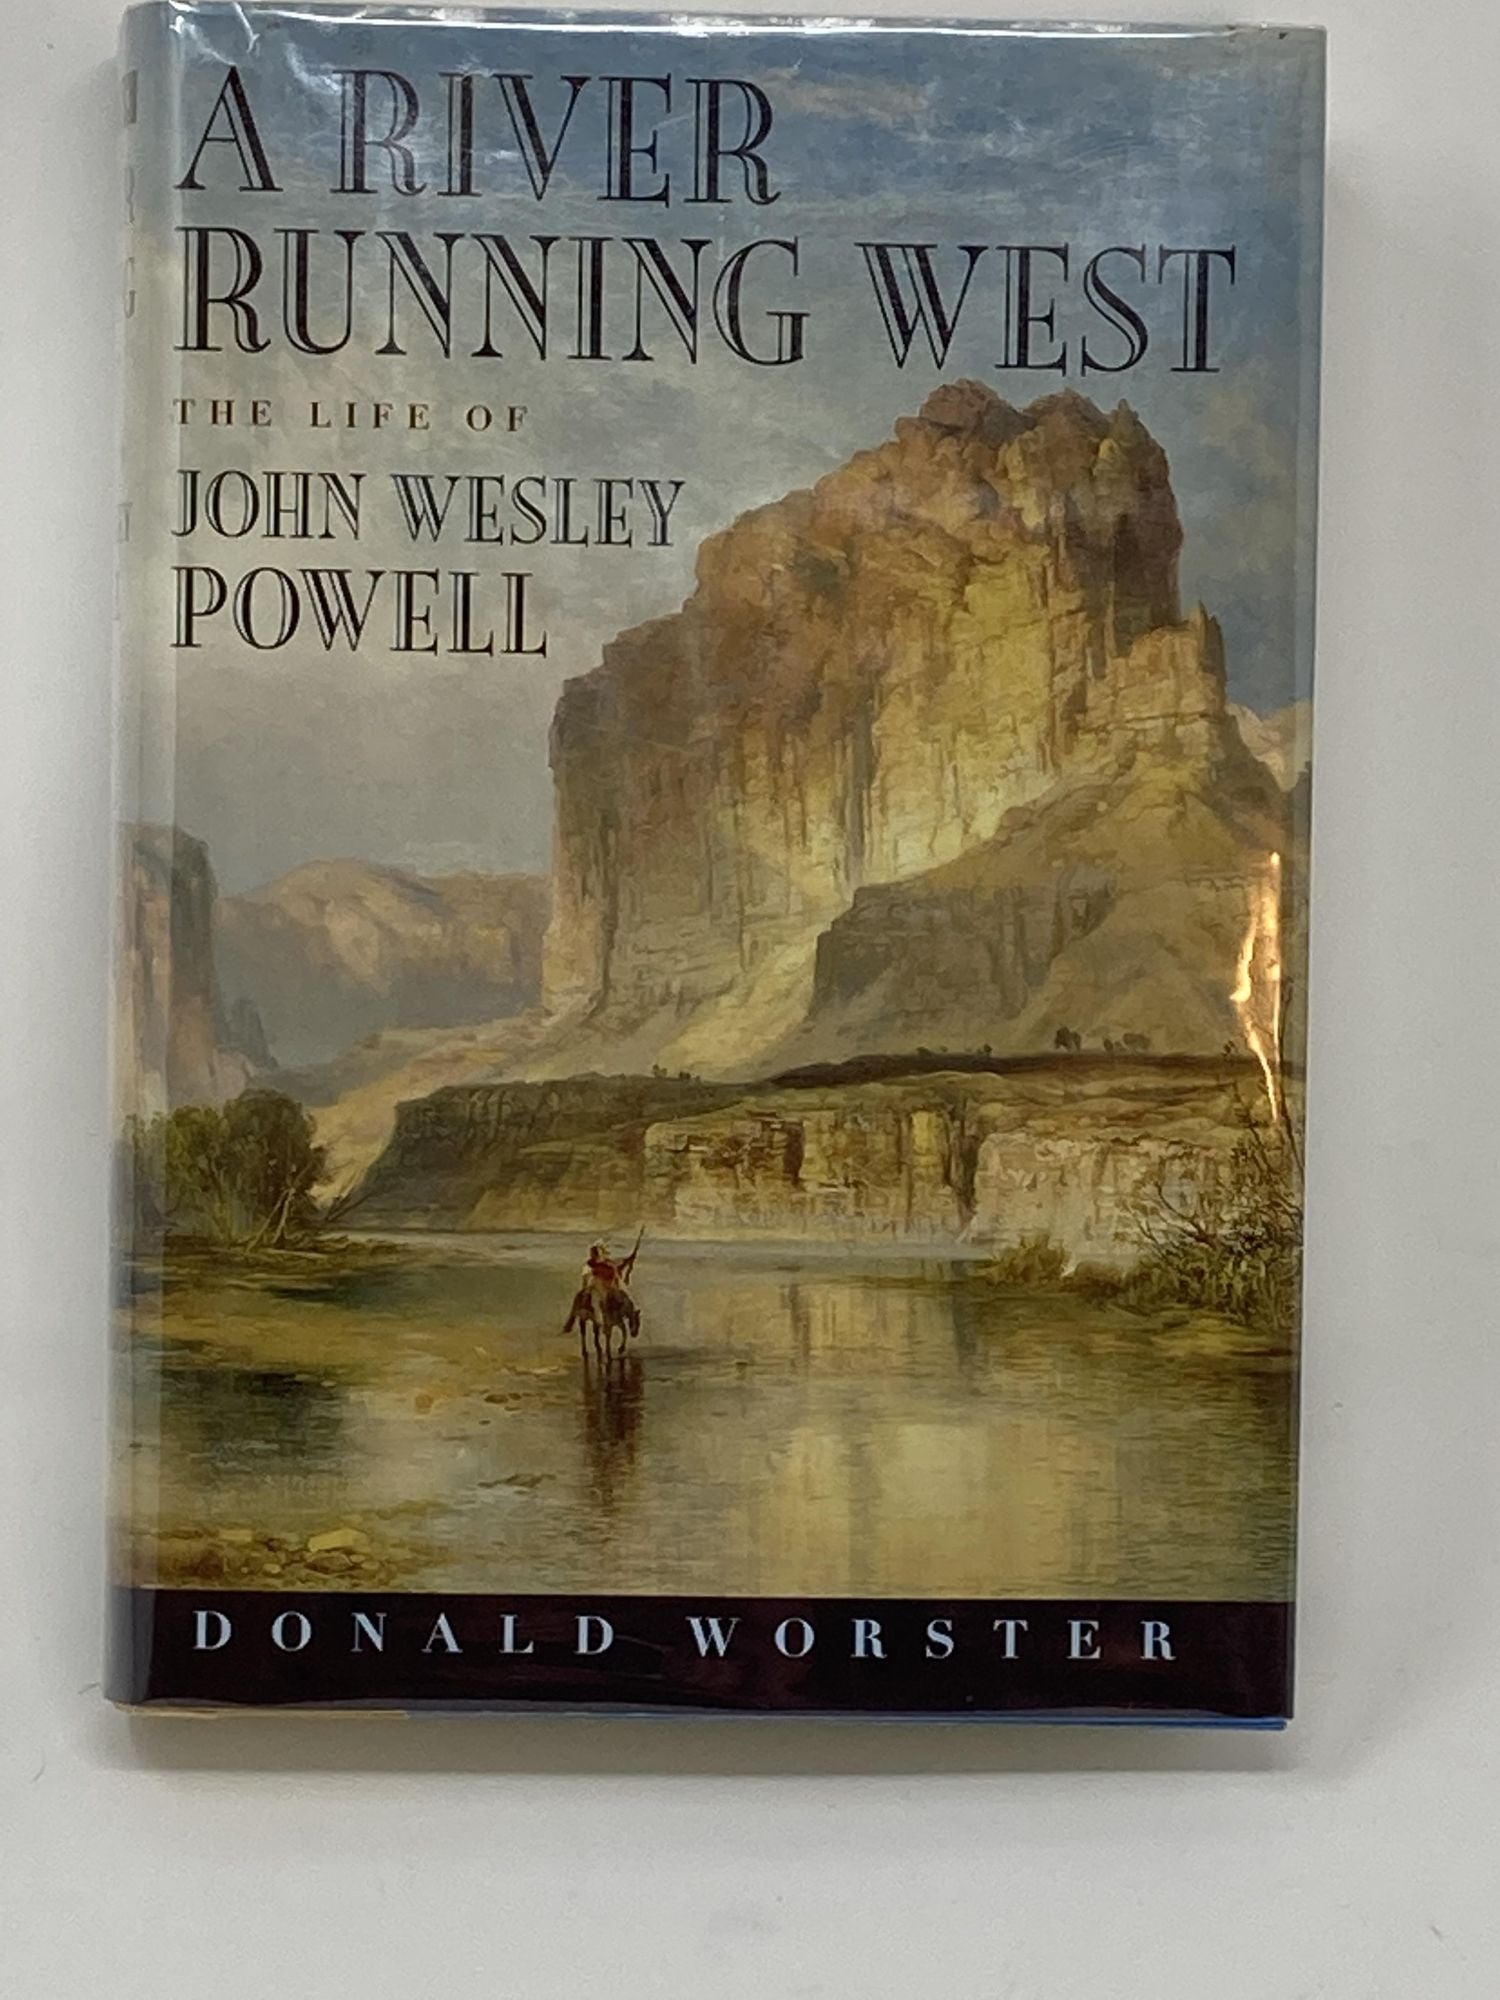 Worster, Donald - A River Running West, the Life of John Wesley Powell (Signed)